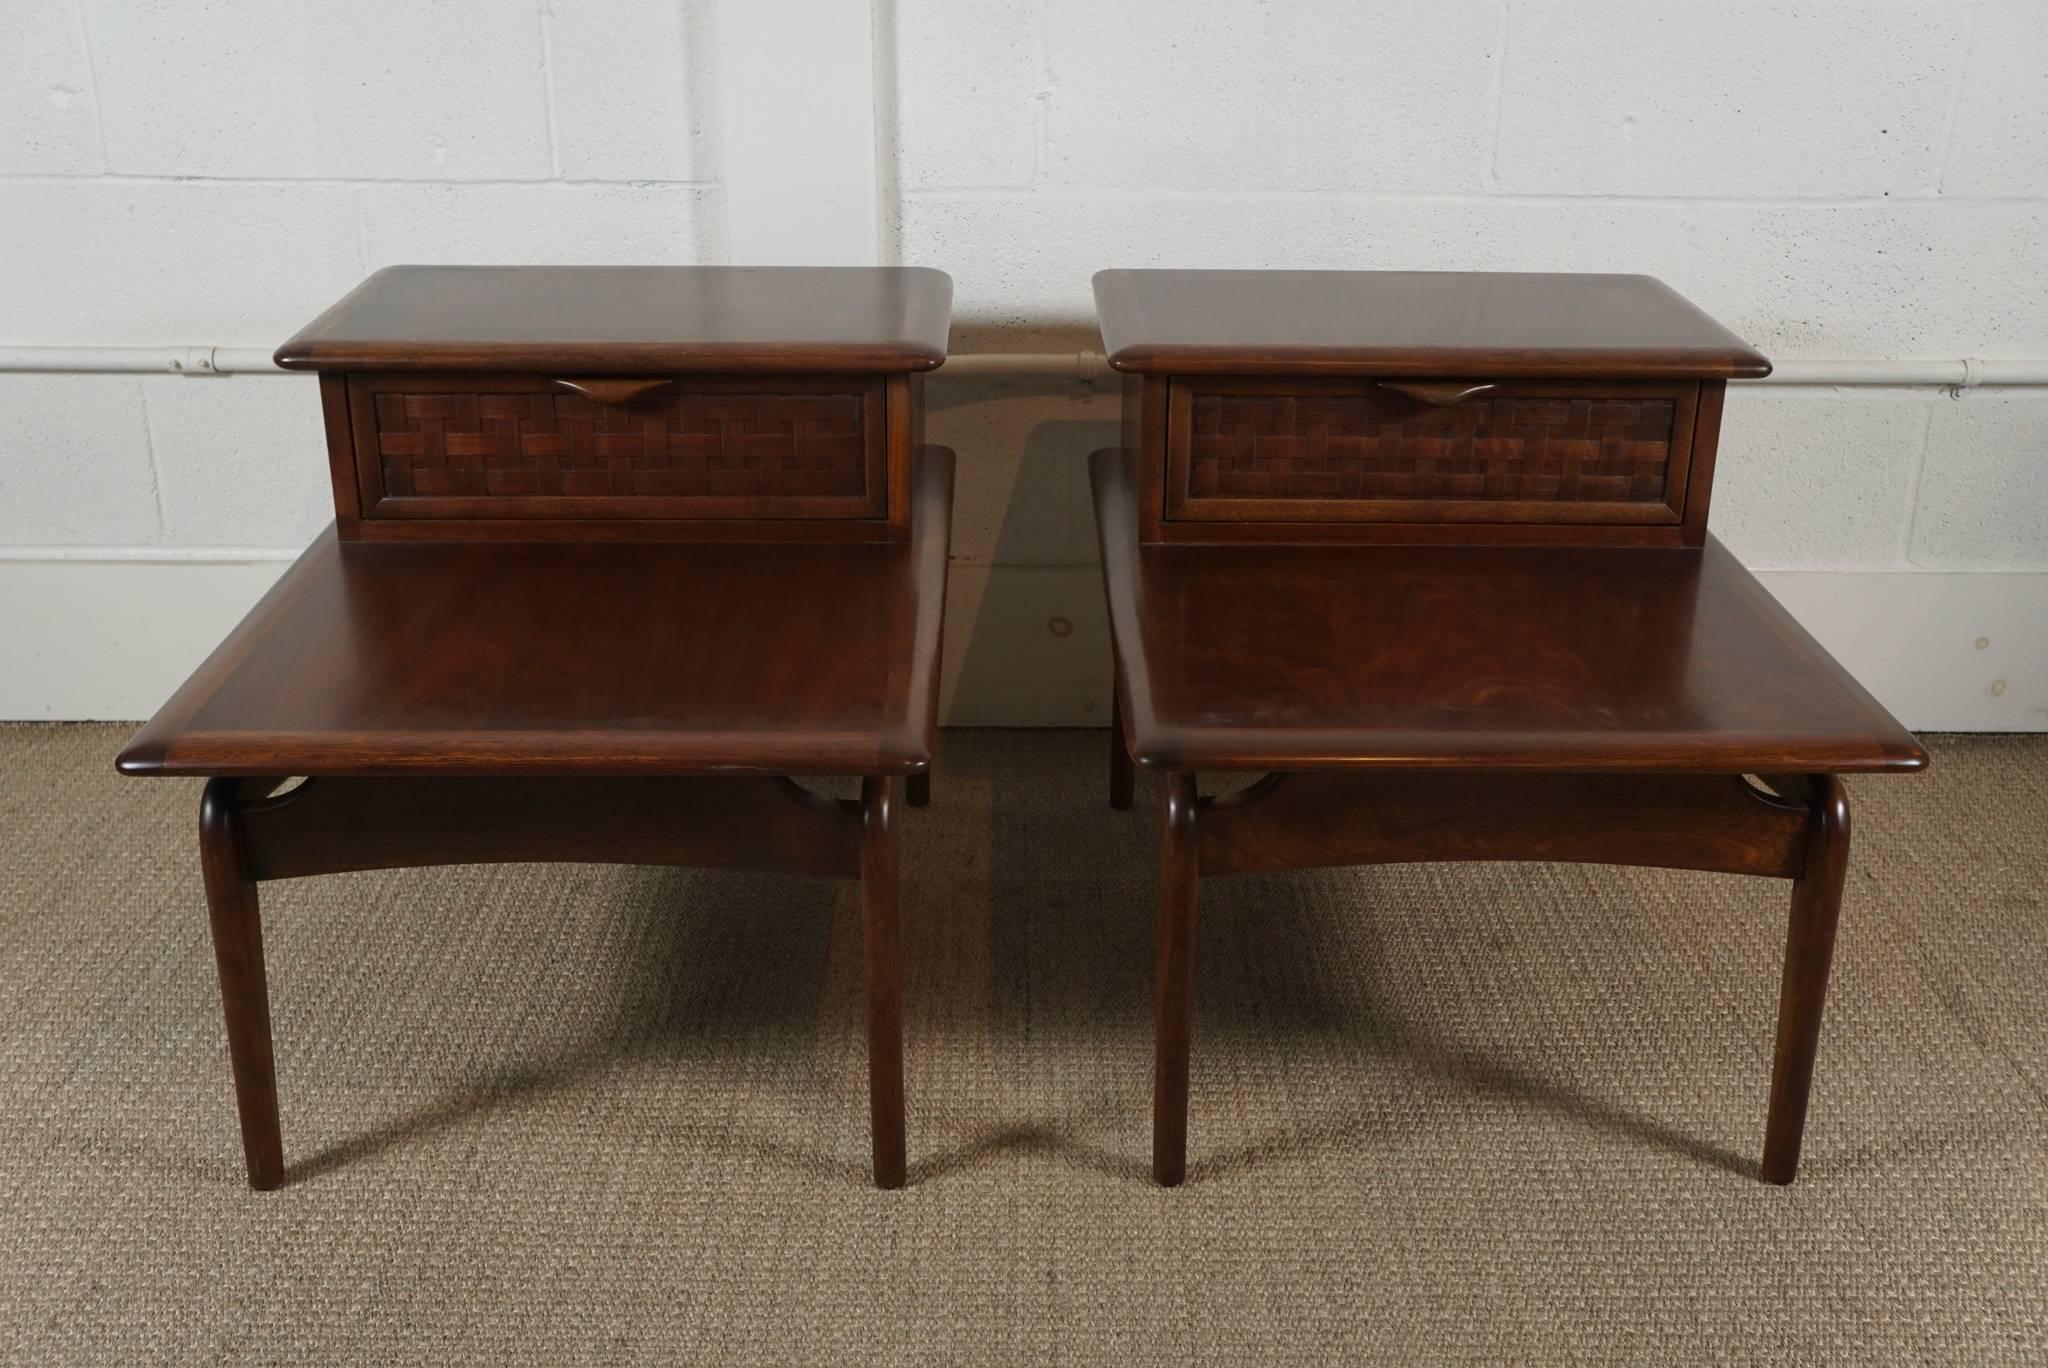 Here is a beautiful pair of walnut stepped tables with a basket weave drawer front. The tables have accent brass spheres that add a nice detail. Newly refurbished, the tables have a a beautiful satin finish and are in excellent condition. The height